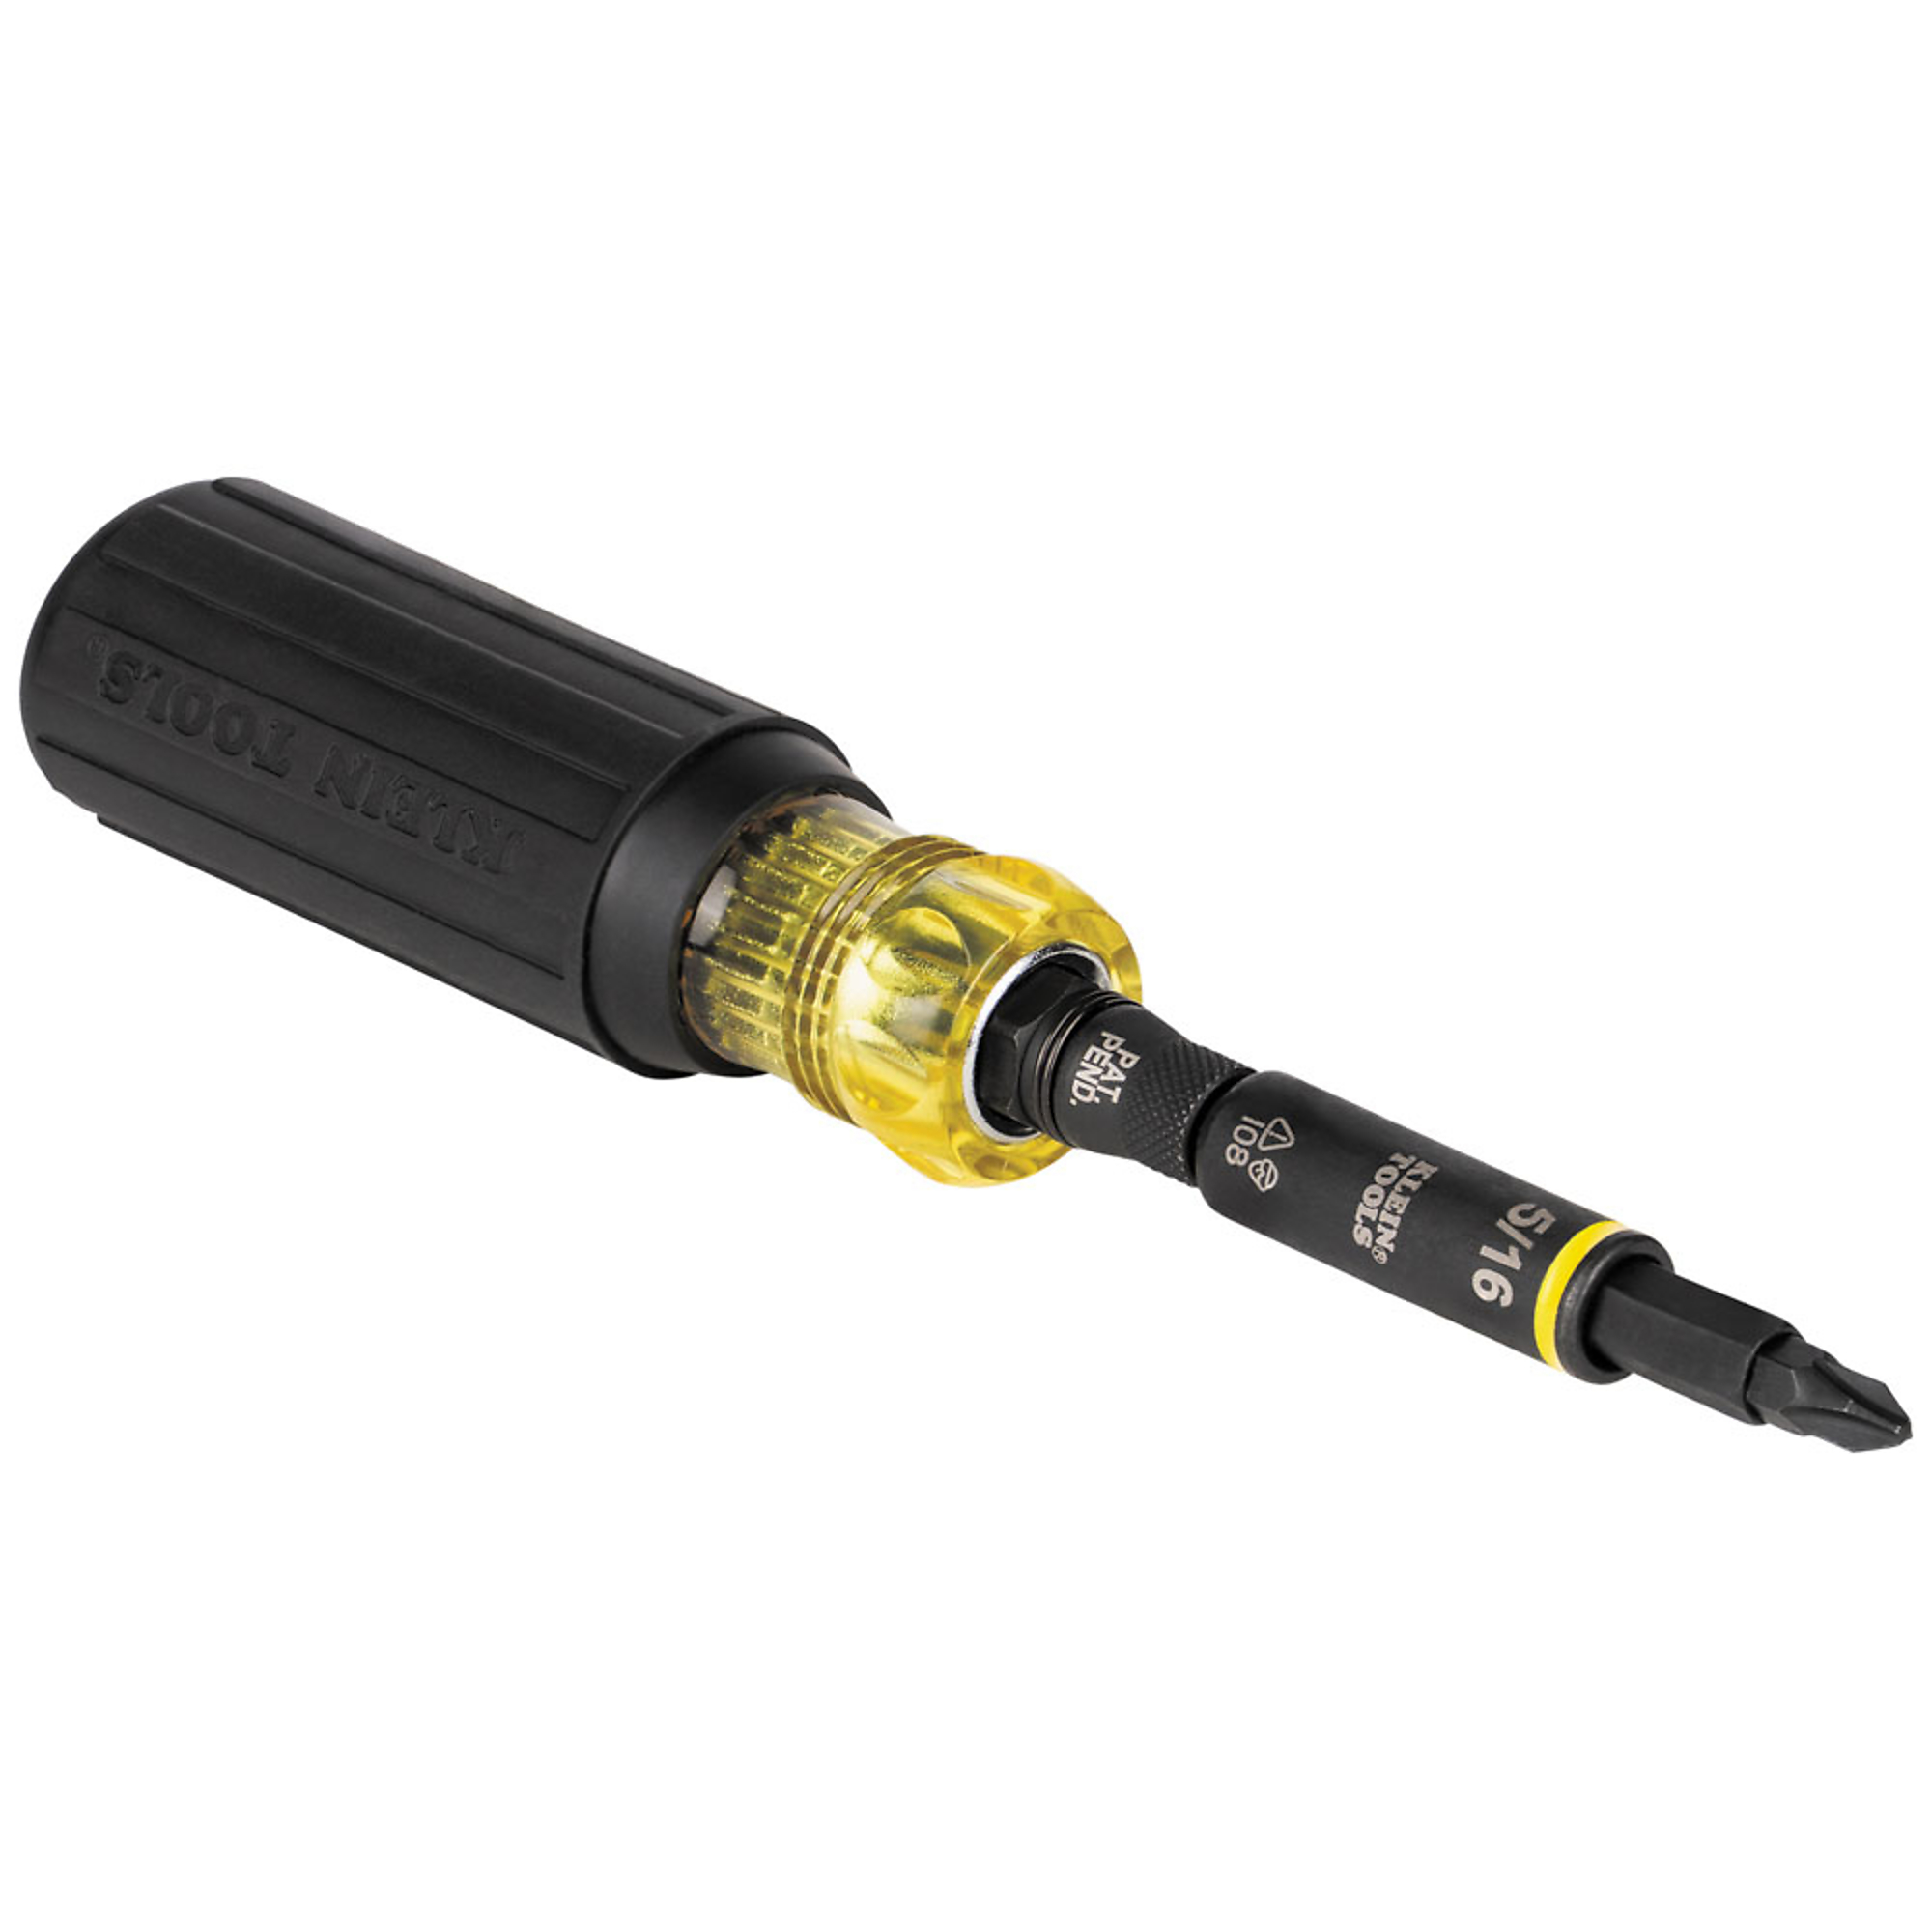 Klein Tools, Impact Rated Multi-Bit Screwdriver / Nut Driver, Drive Type Combination, Model 32500HD